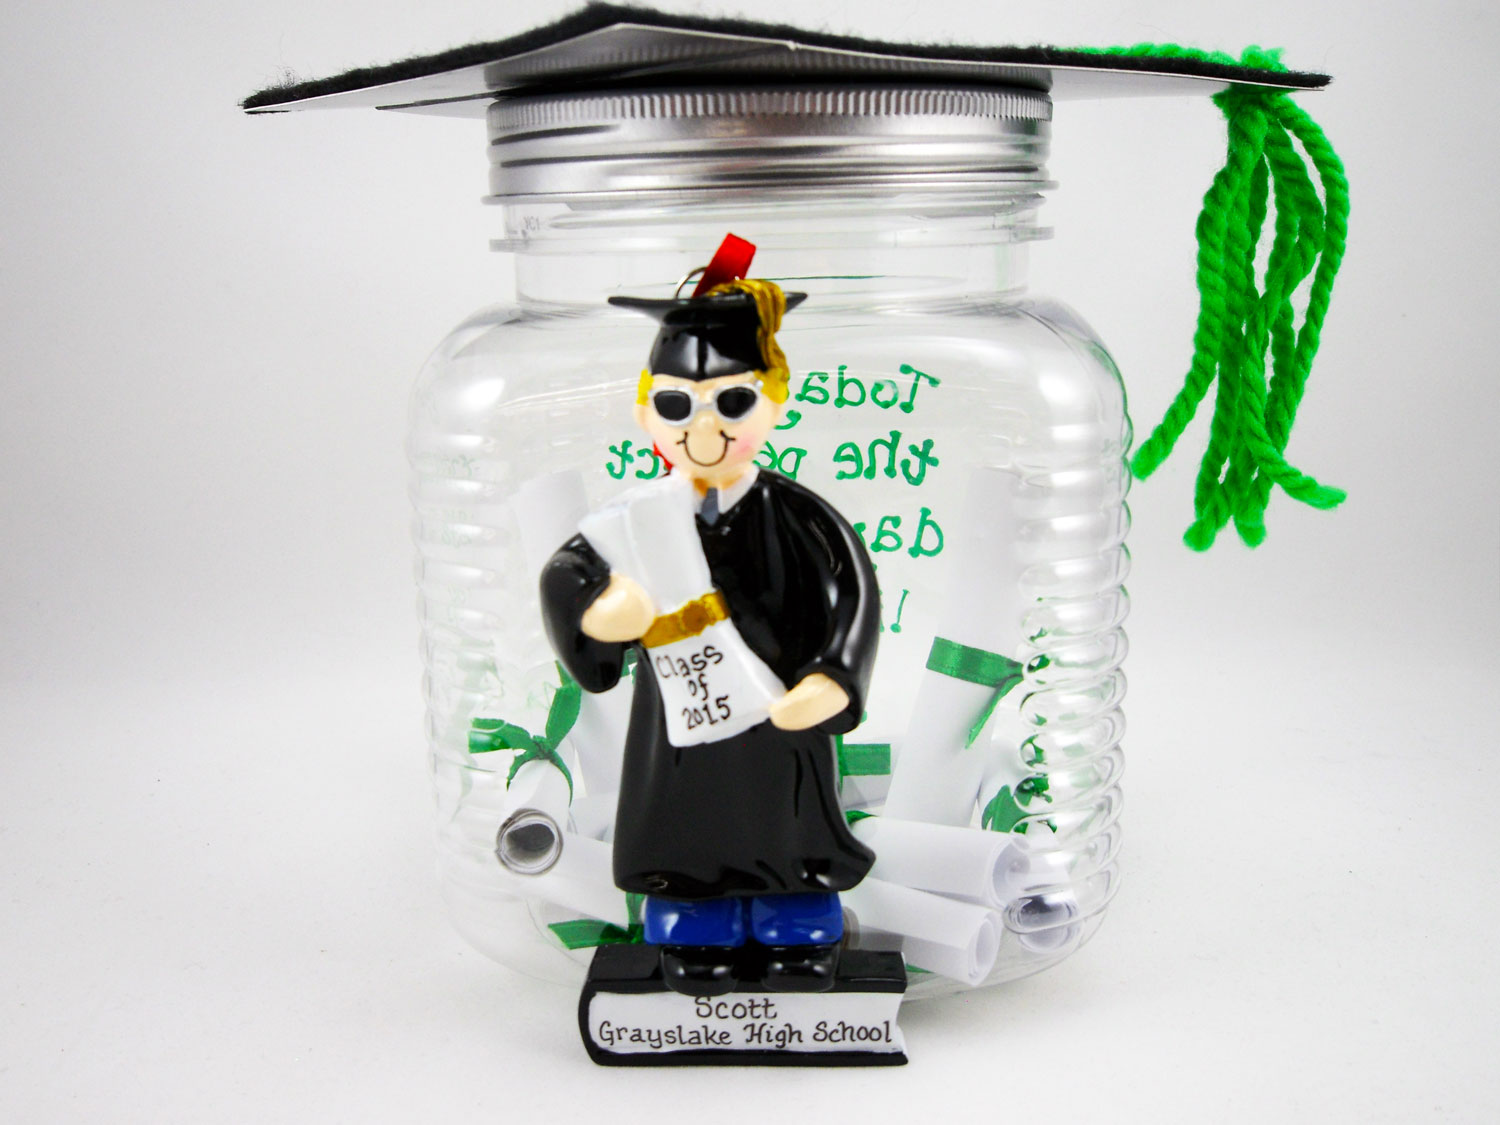 A creative money jar gift with rolled up dollar bills as diplomas and a personalized ornament glued to the front. Learn to make it yourself | OrnamentShop.com